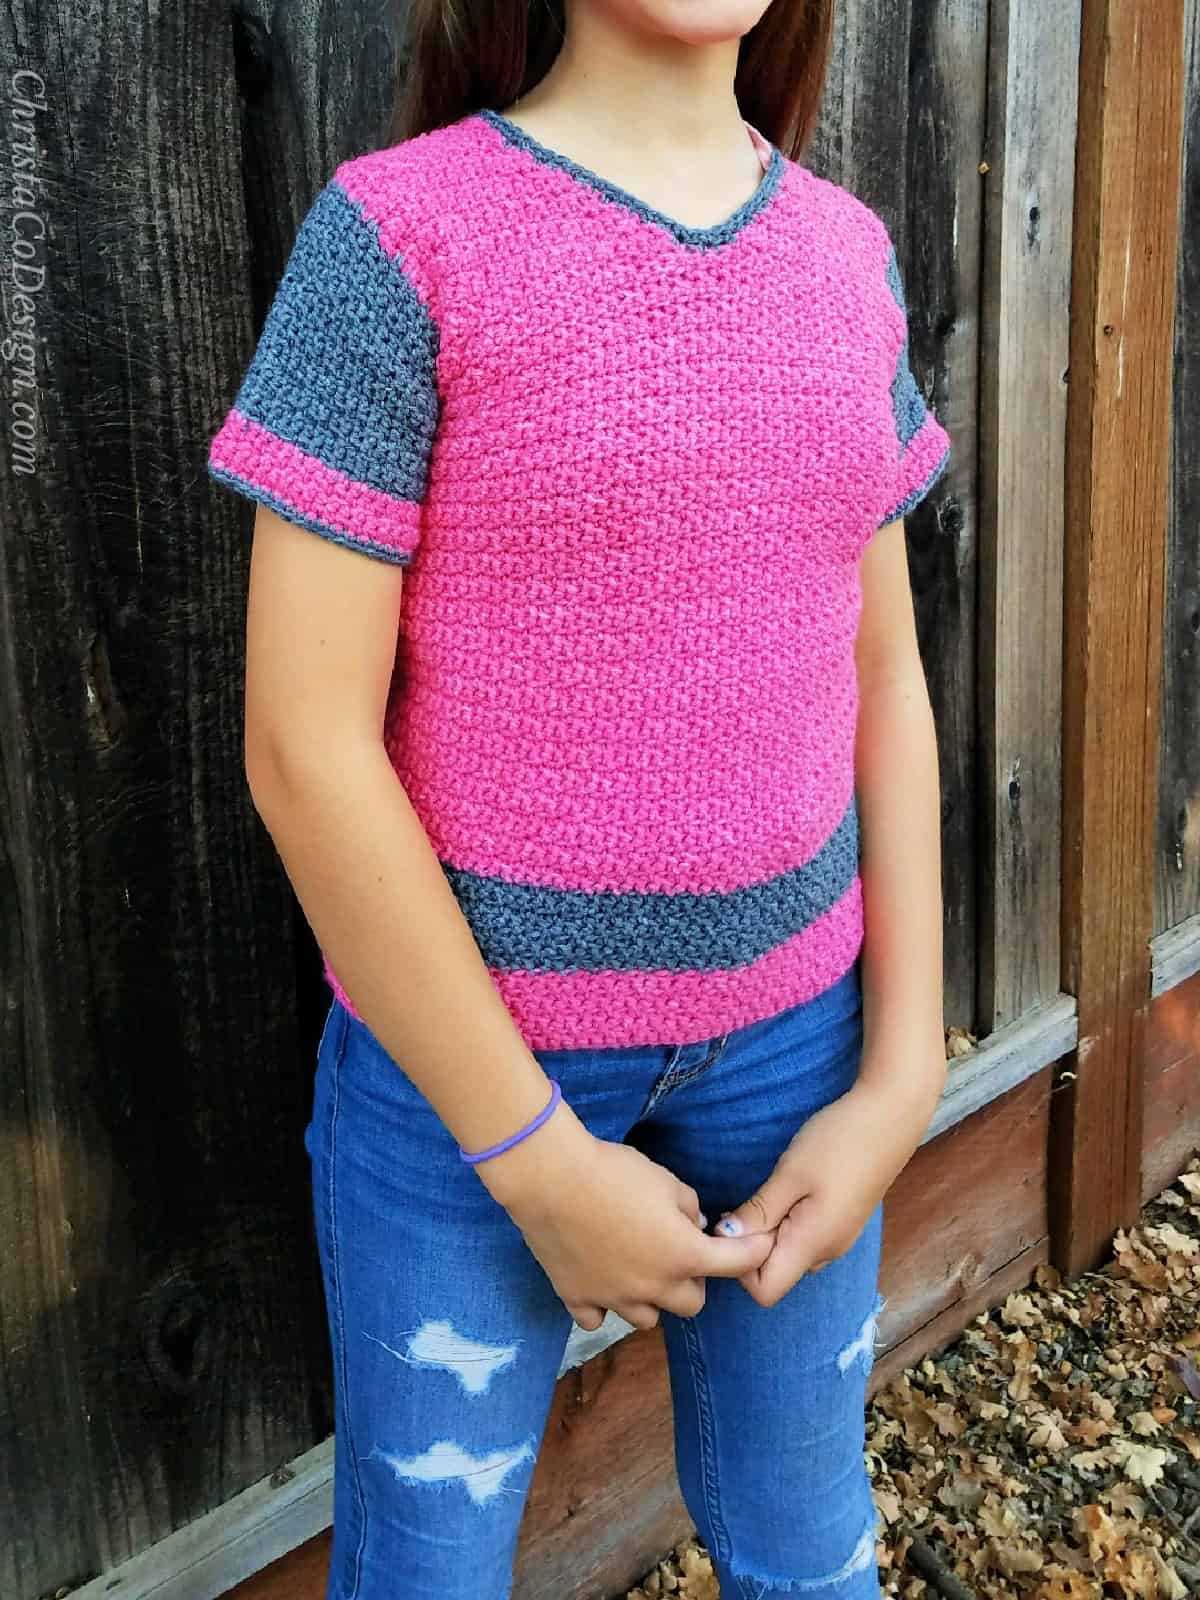 Girl in pink sweater with hands clasped.